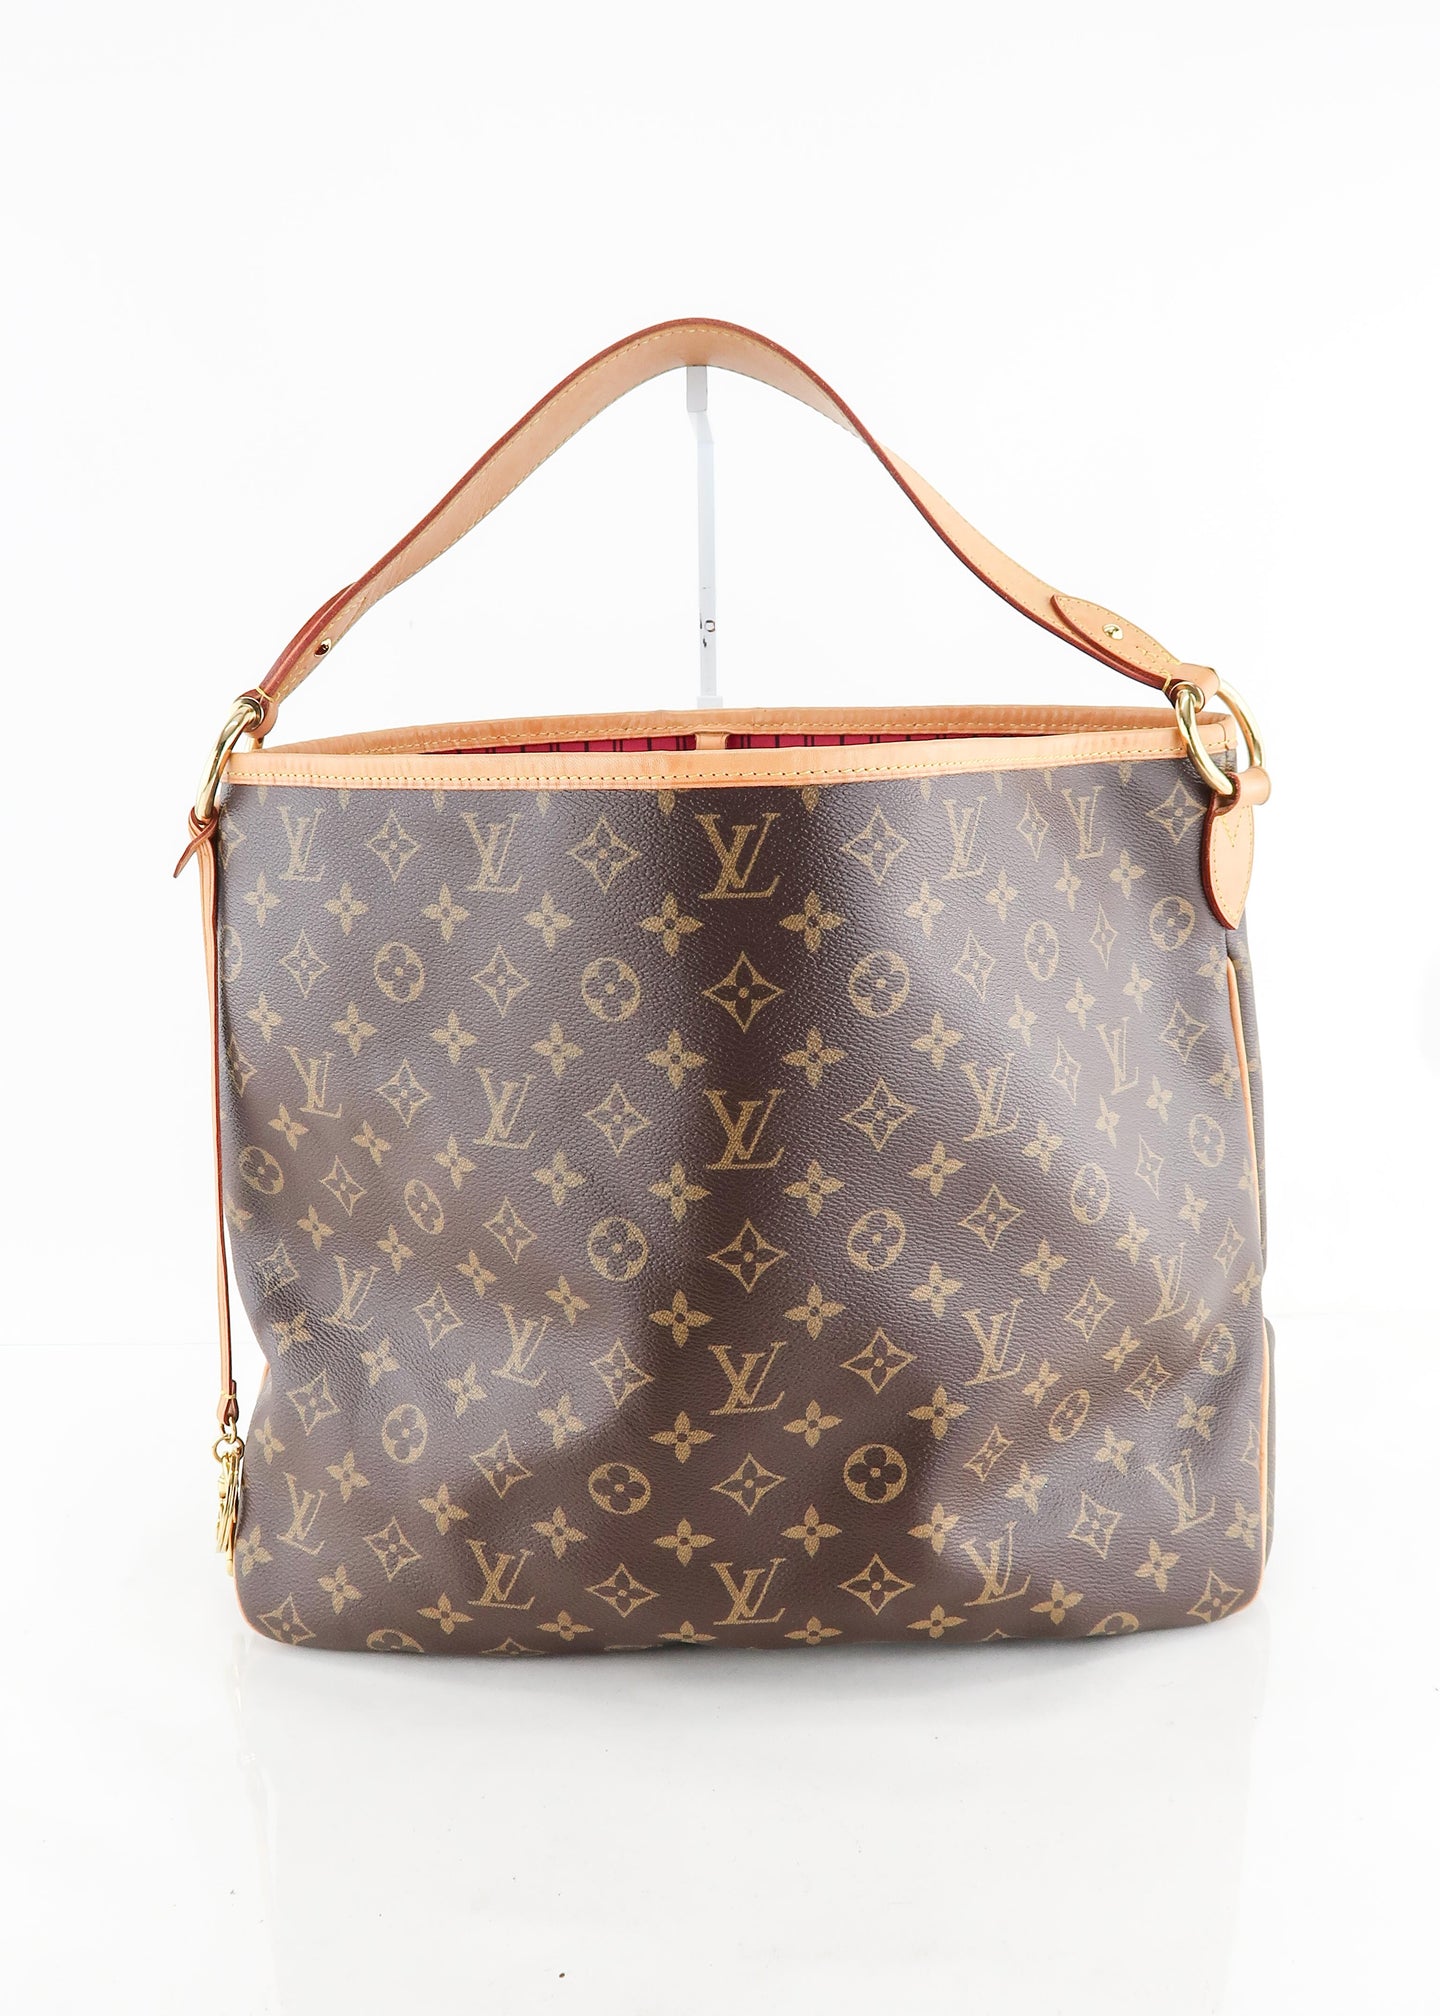 Louis Vuitton Monogram Delightful PM. Hobo bags are always a